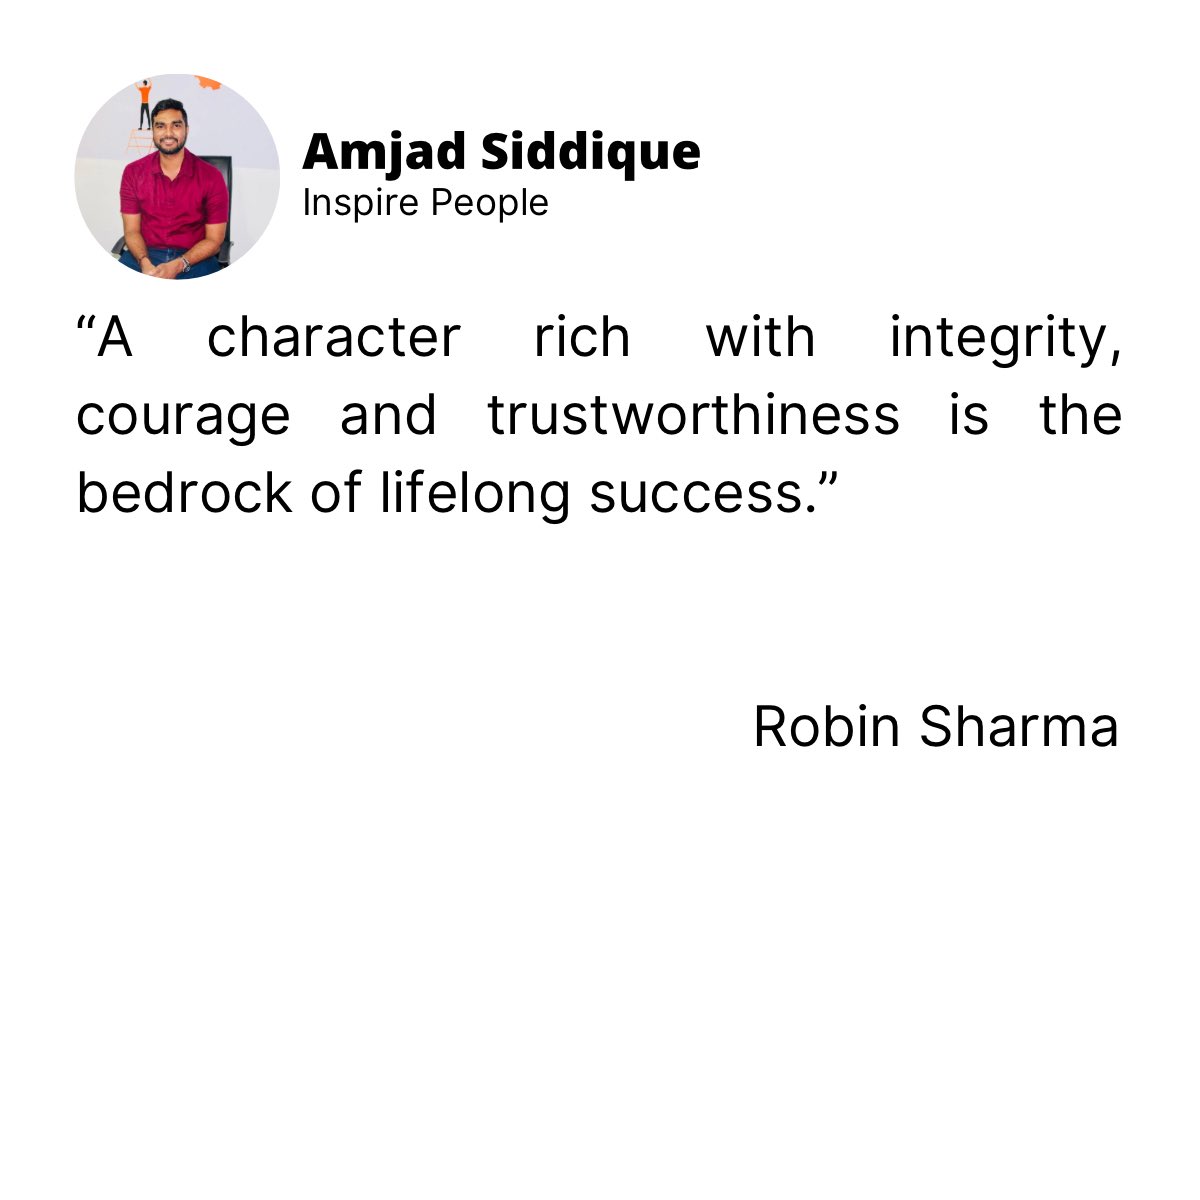 Learnings From My Reading Journey 📖               

What do you think? 🤔 please share your thoughts 💭, Thank you!

MegaLiving: 30 Days To A Perfect Life 
Robin Sharma

For more updates follow - @amjad__siddique                   

#readingbooks #education #amjadsiddique